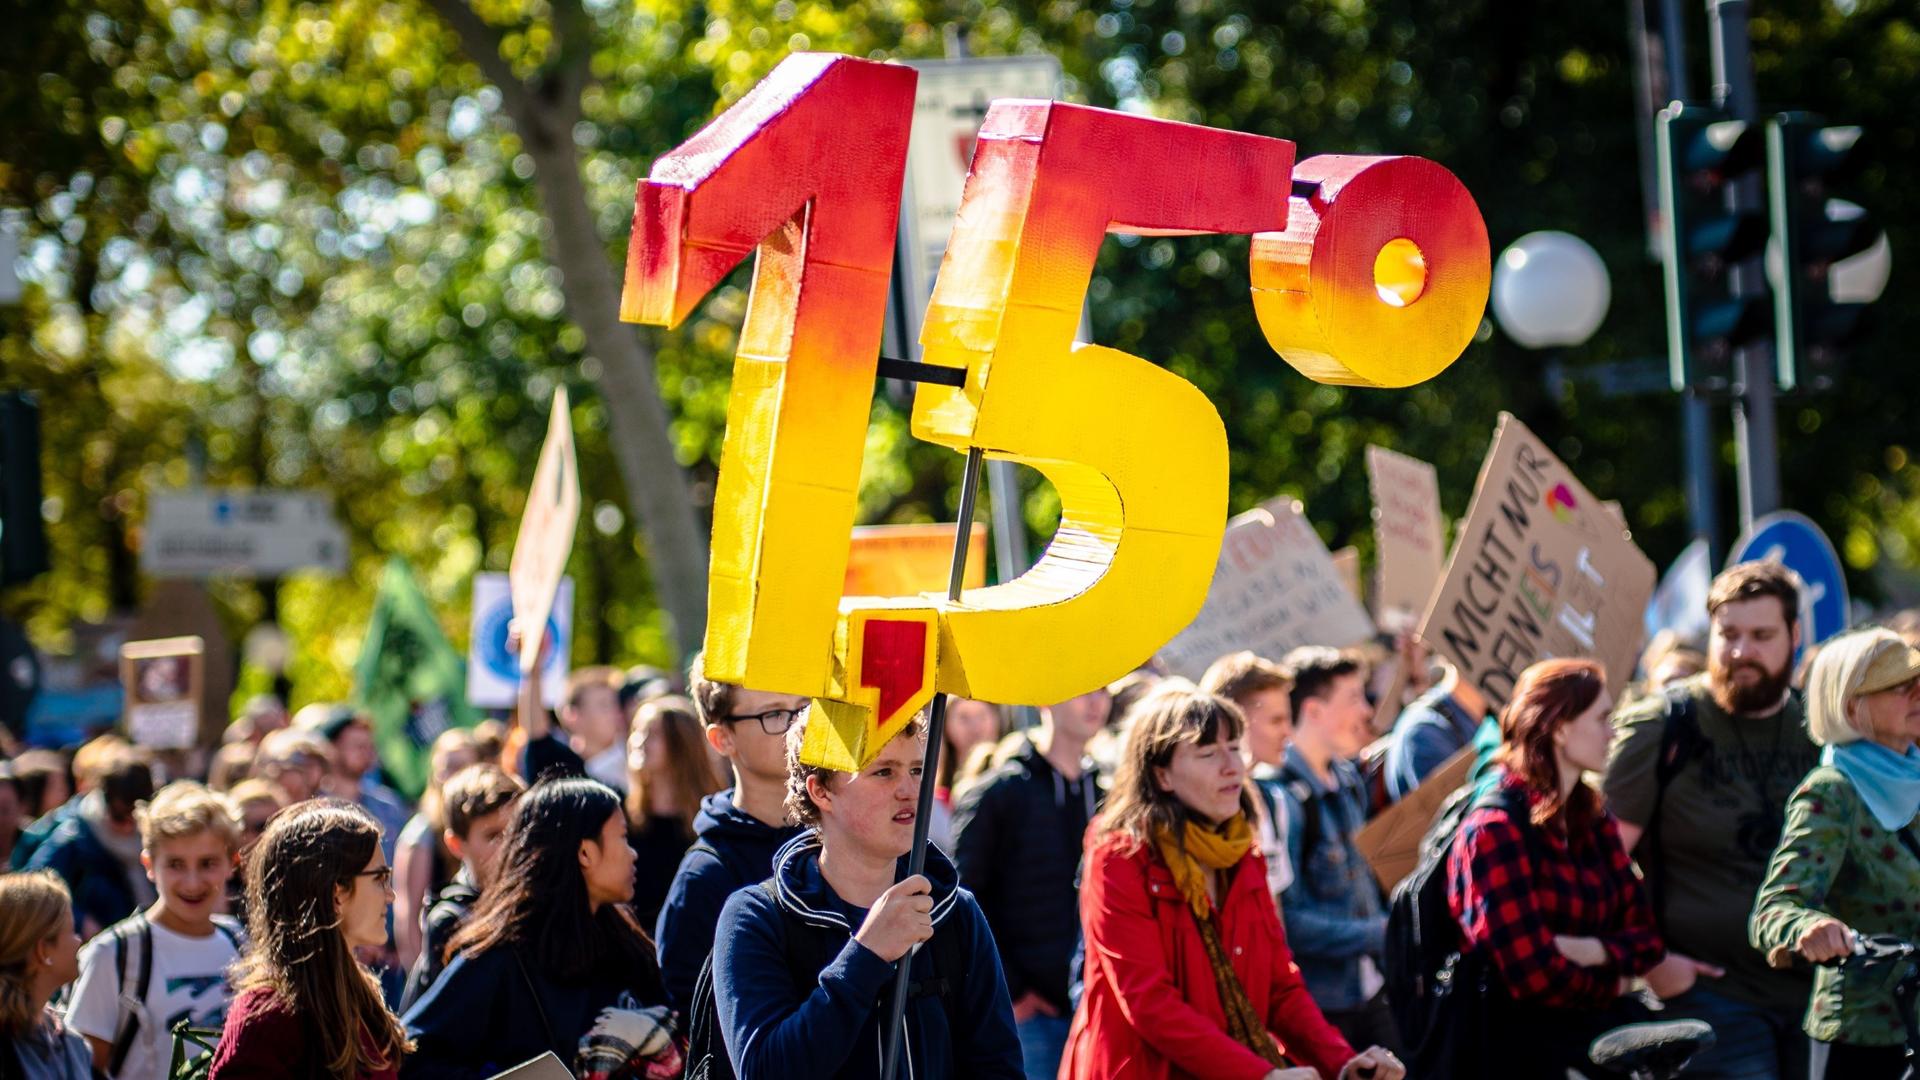 A climate protest. One person holds a sign that states1,5 degrees